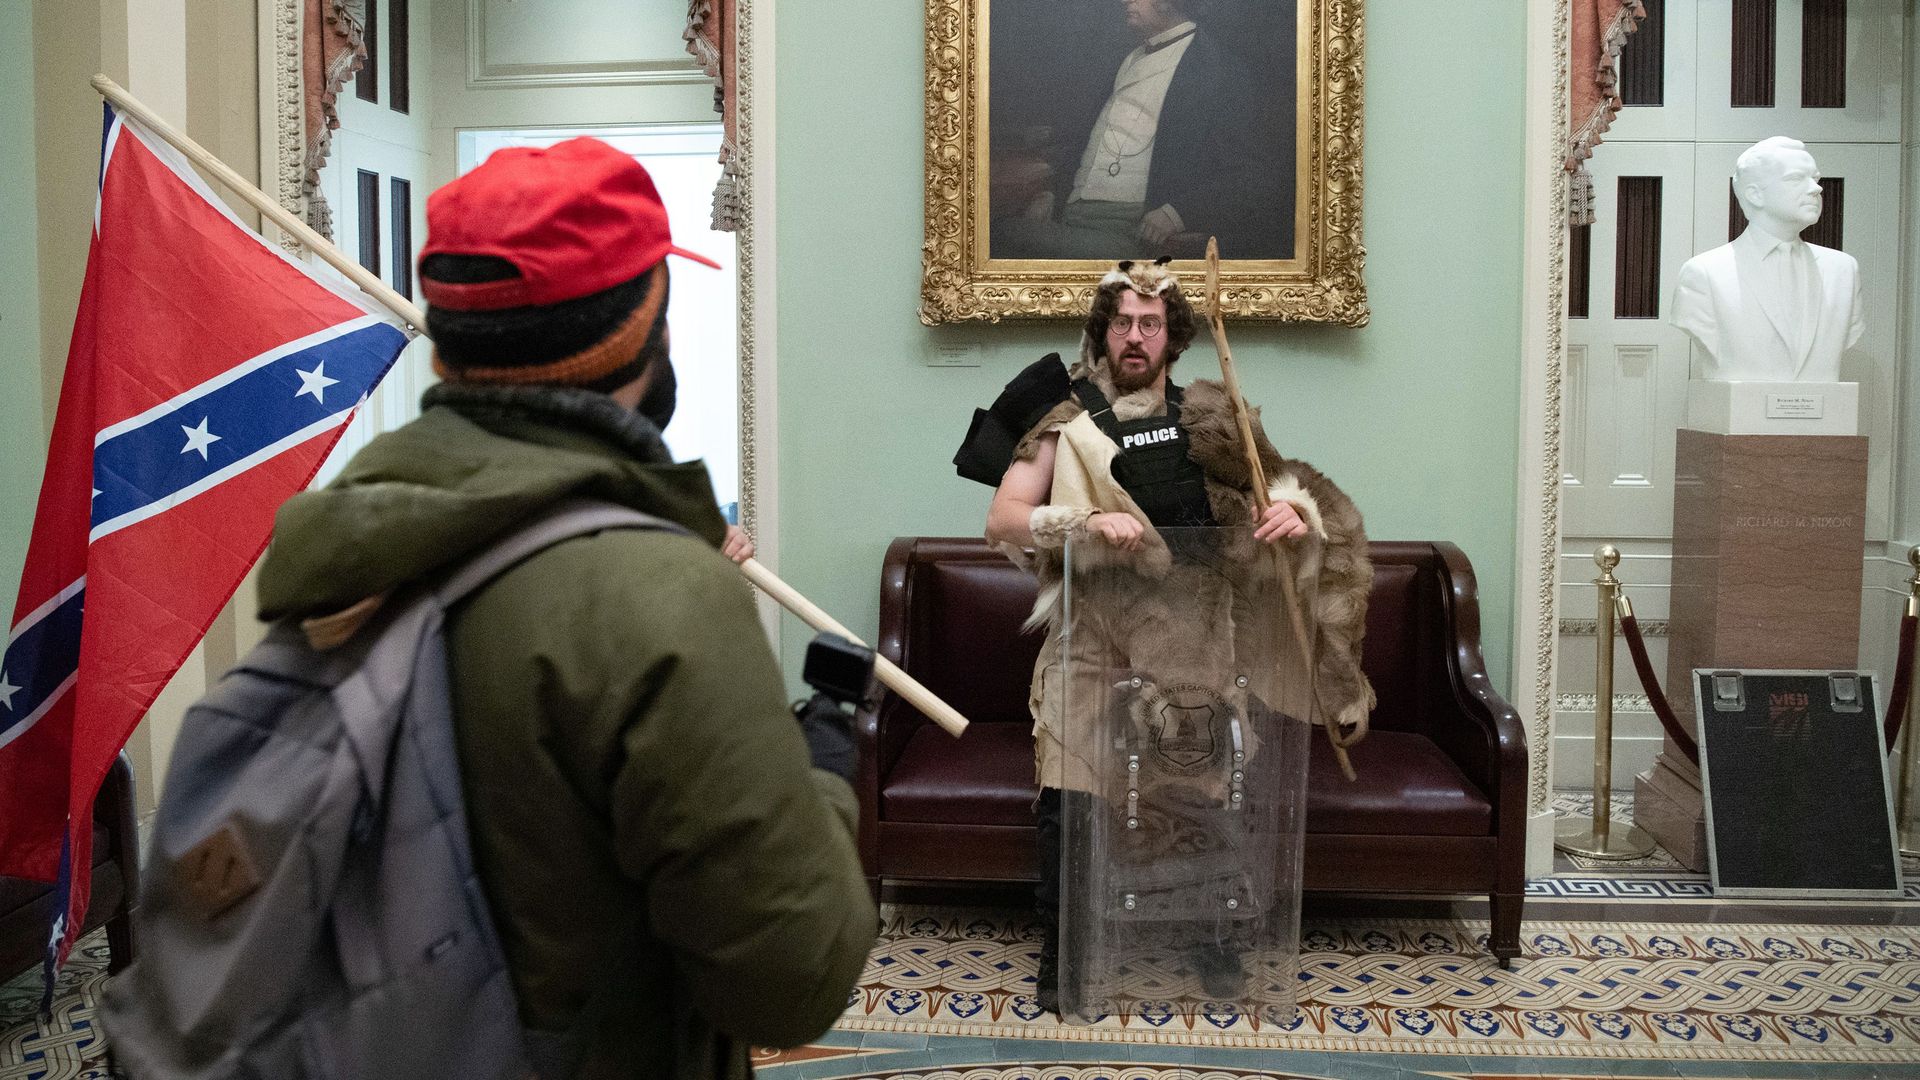 A man is seen carrying a Confederate flag outside the Senate Chamber after the Capitol was stormed Wednesday.